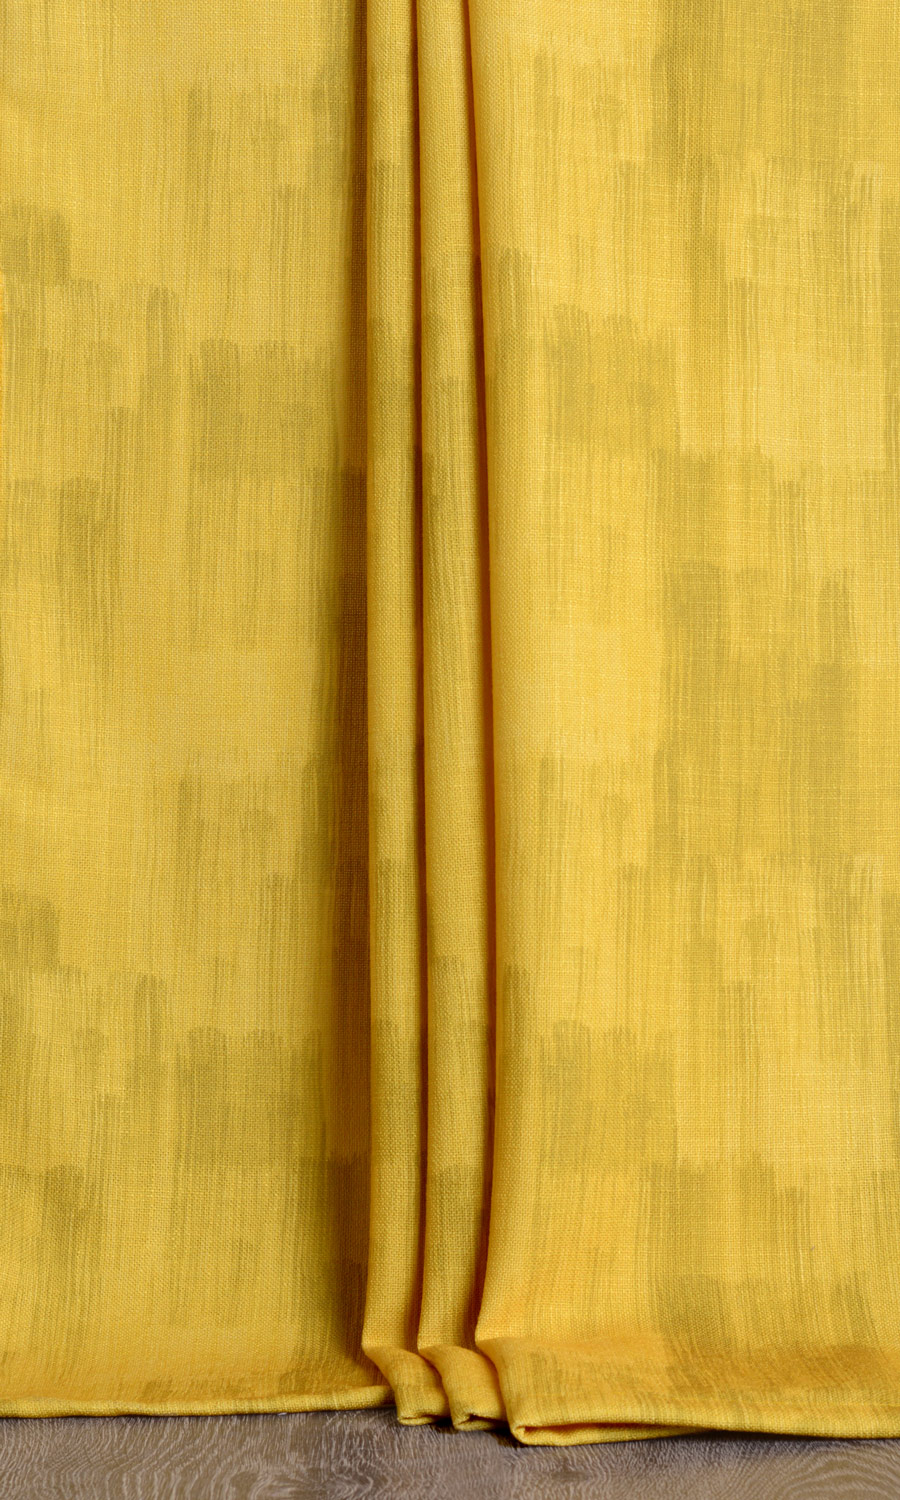 Aramis' Watercolor Effect Curtains/ Drapes (Topaz Yellow) – Spiffy